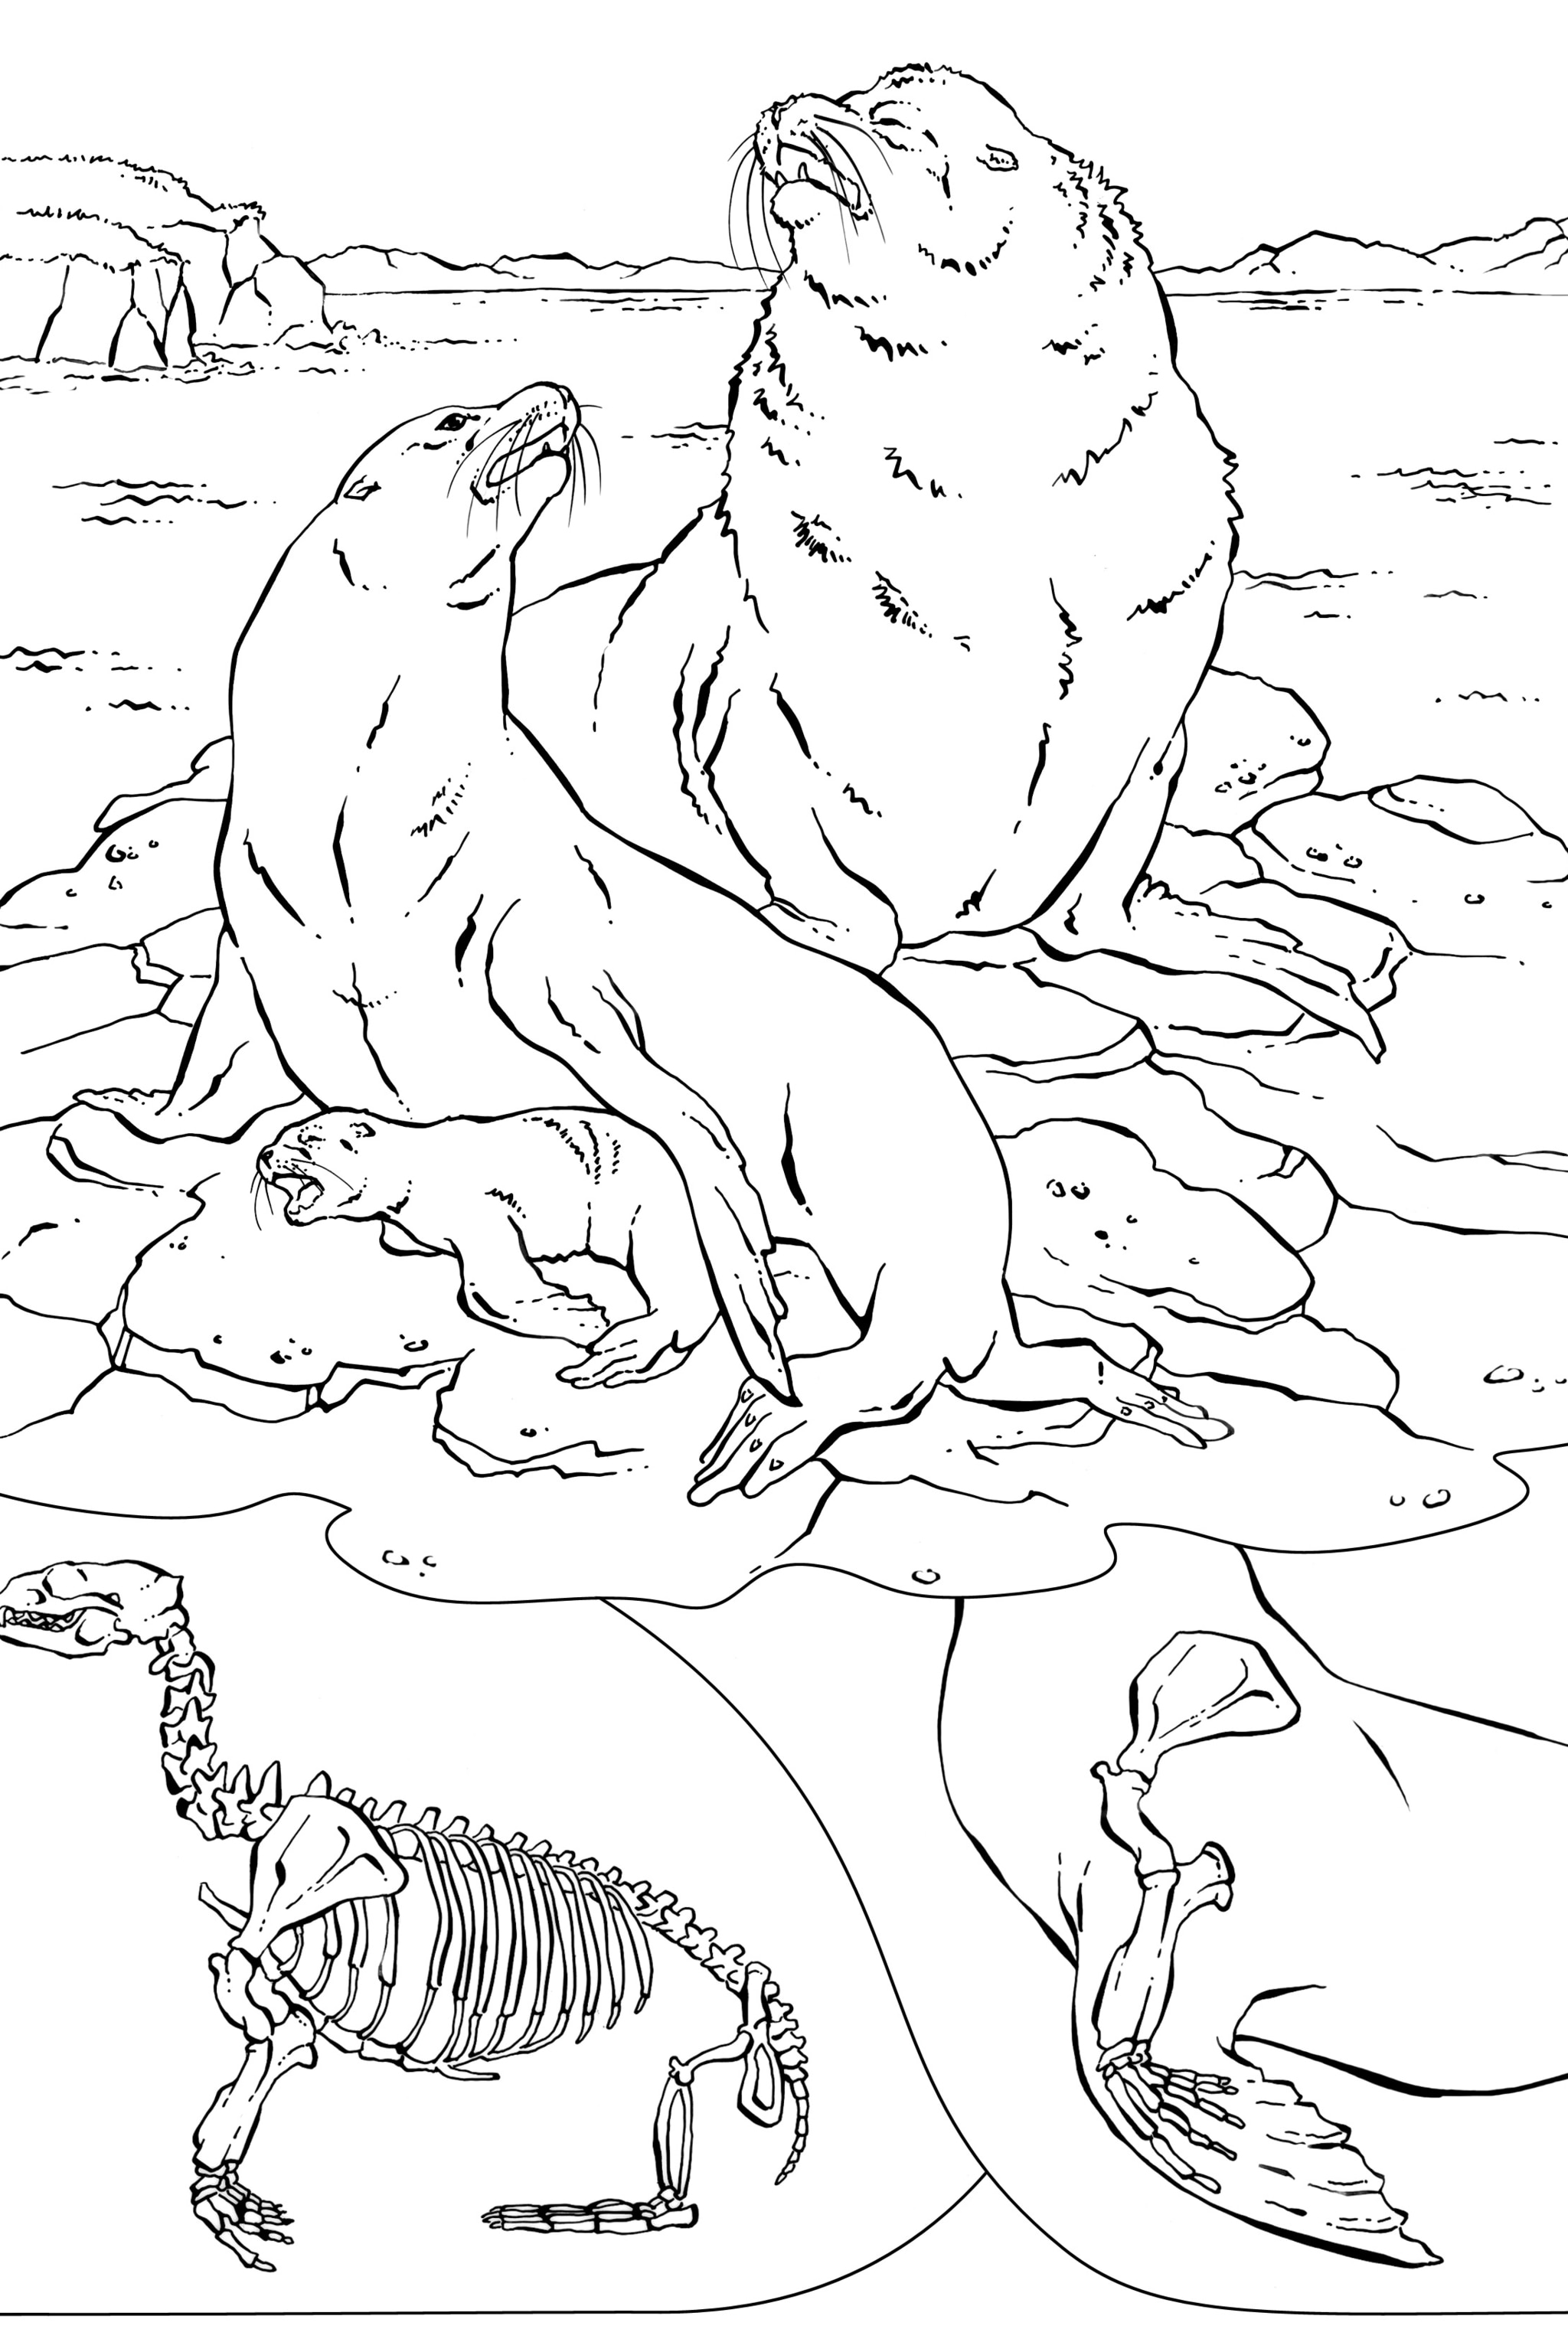 Coloring book animals a to i